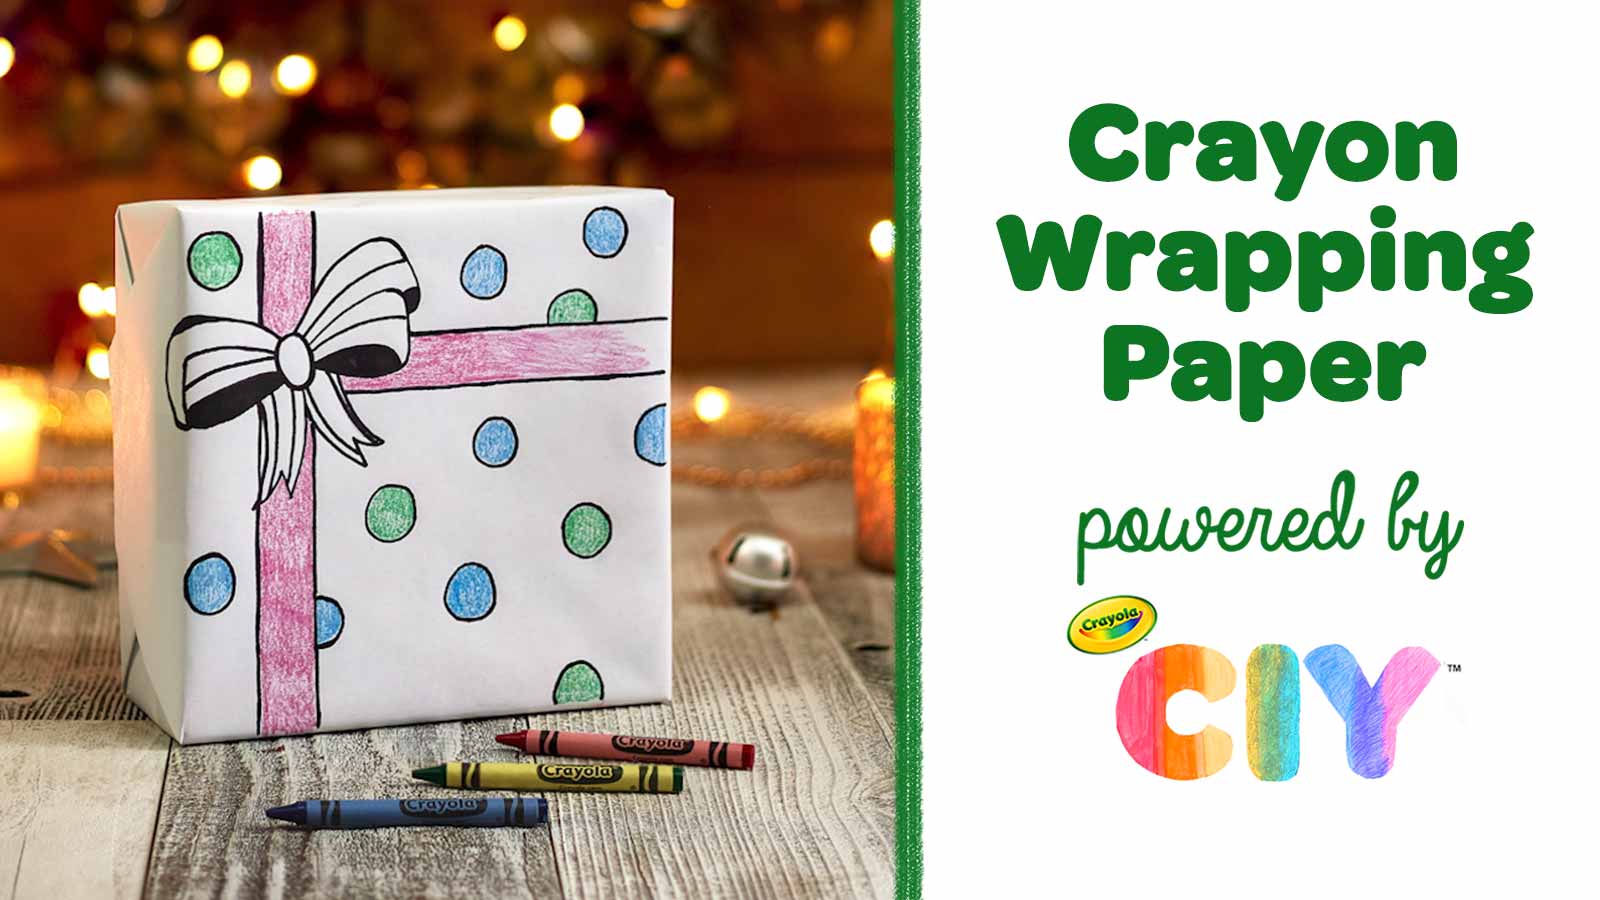 Crayon-Wrapping-Paper_Poster-Frame